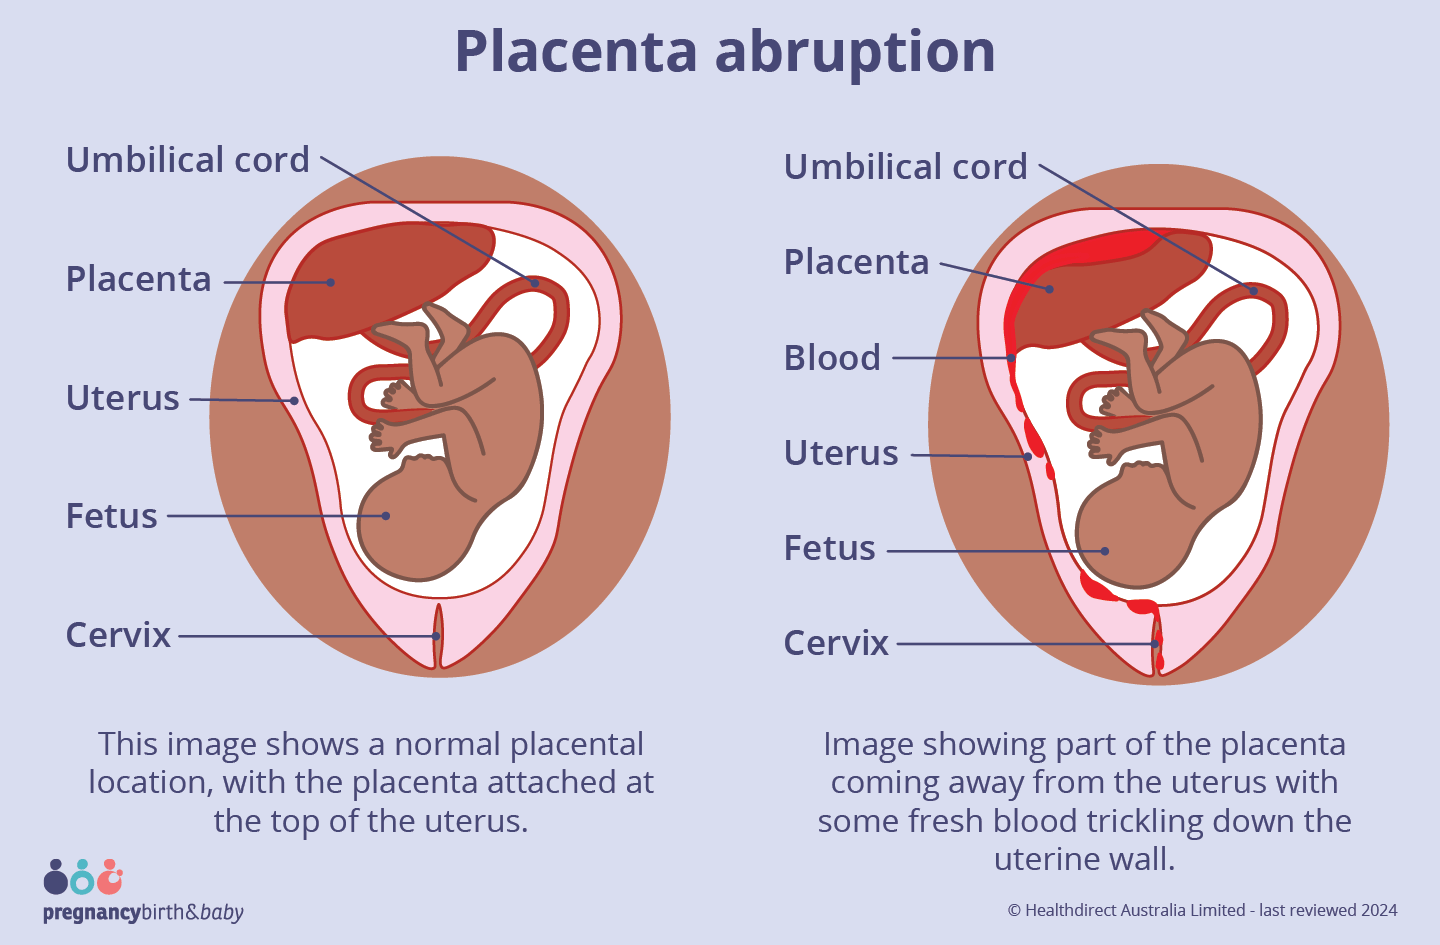 Image showing part of the placenta coming away from the uterus with some fresh blood trickling down the uterine wall